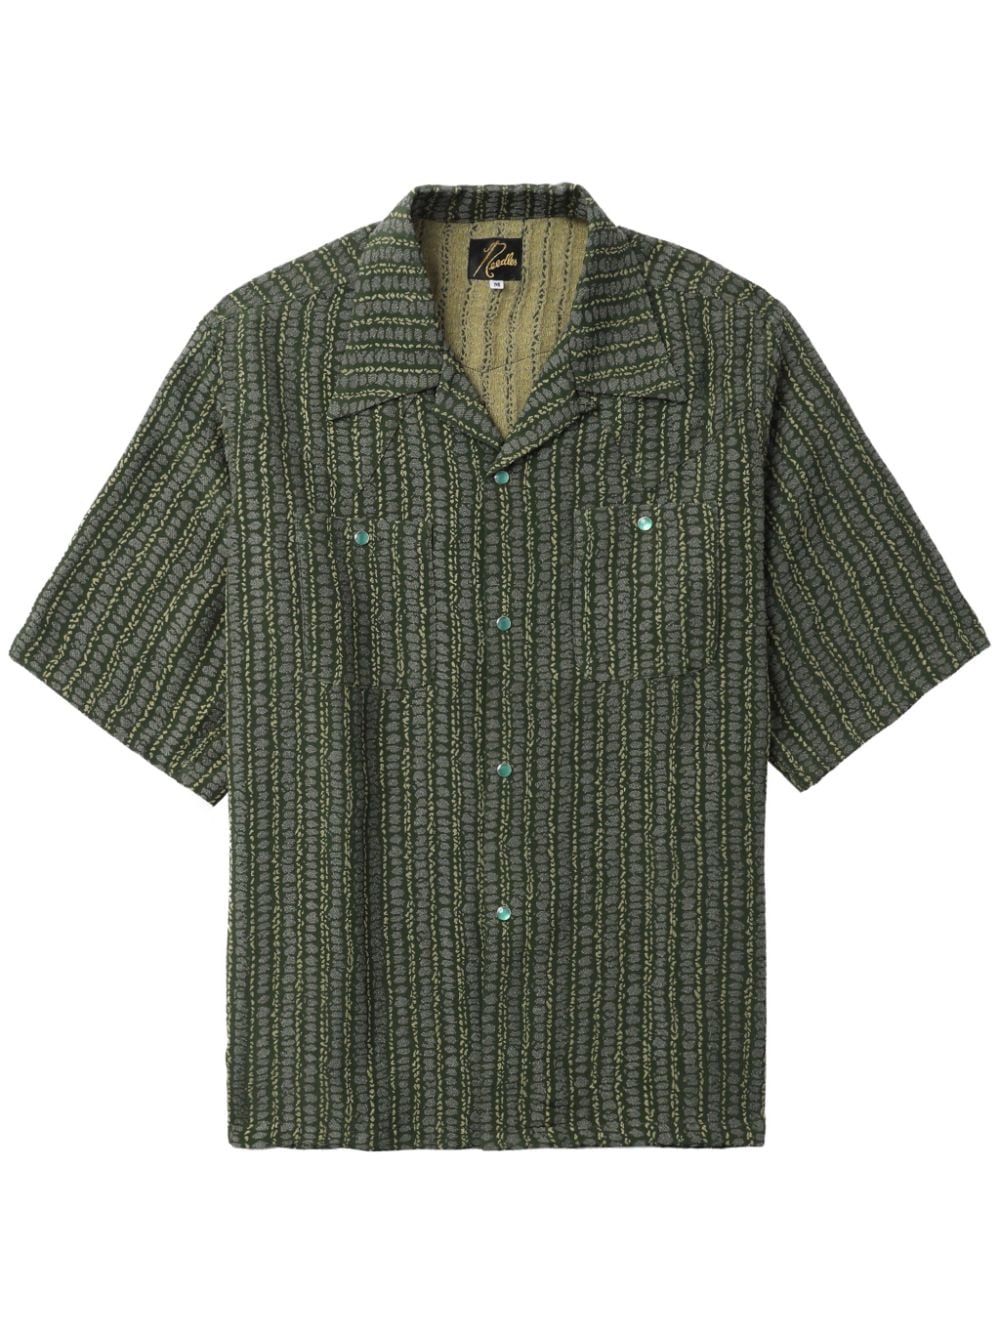 Needles Cowboy One-up Shirt In Green